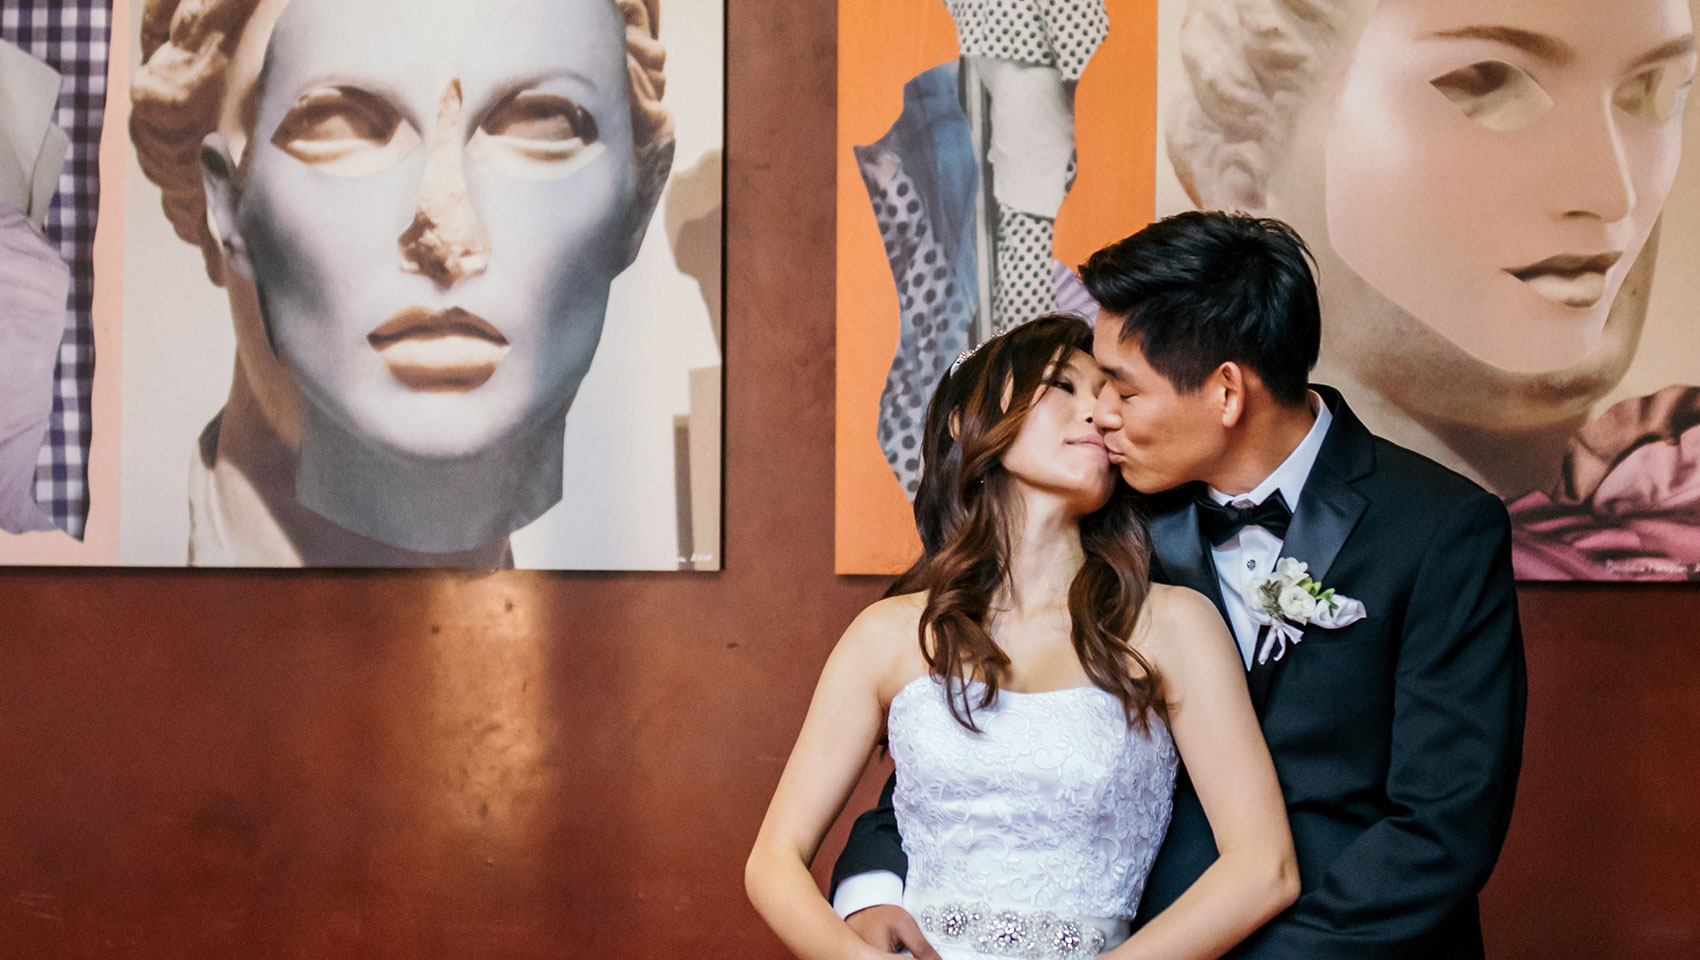 Munji and Eun Joon kissing delicately in front of Hotel Eventi art pieces